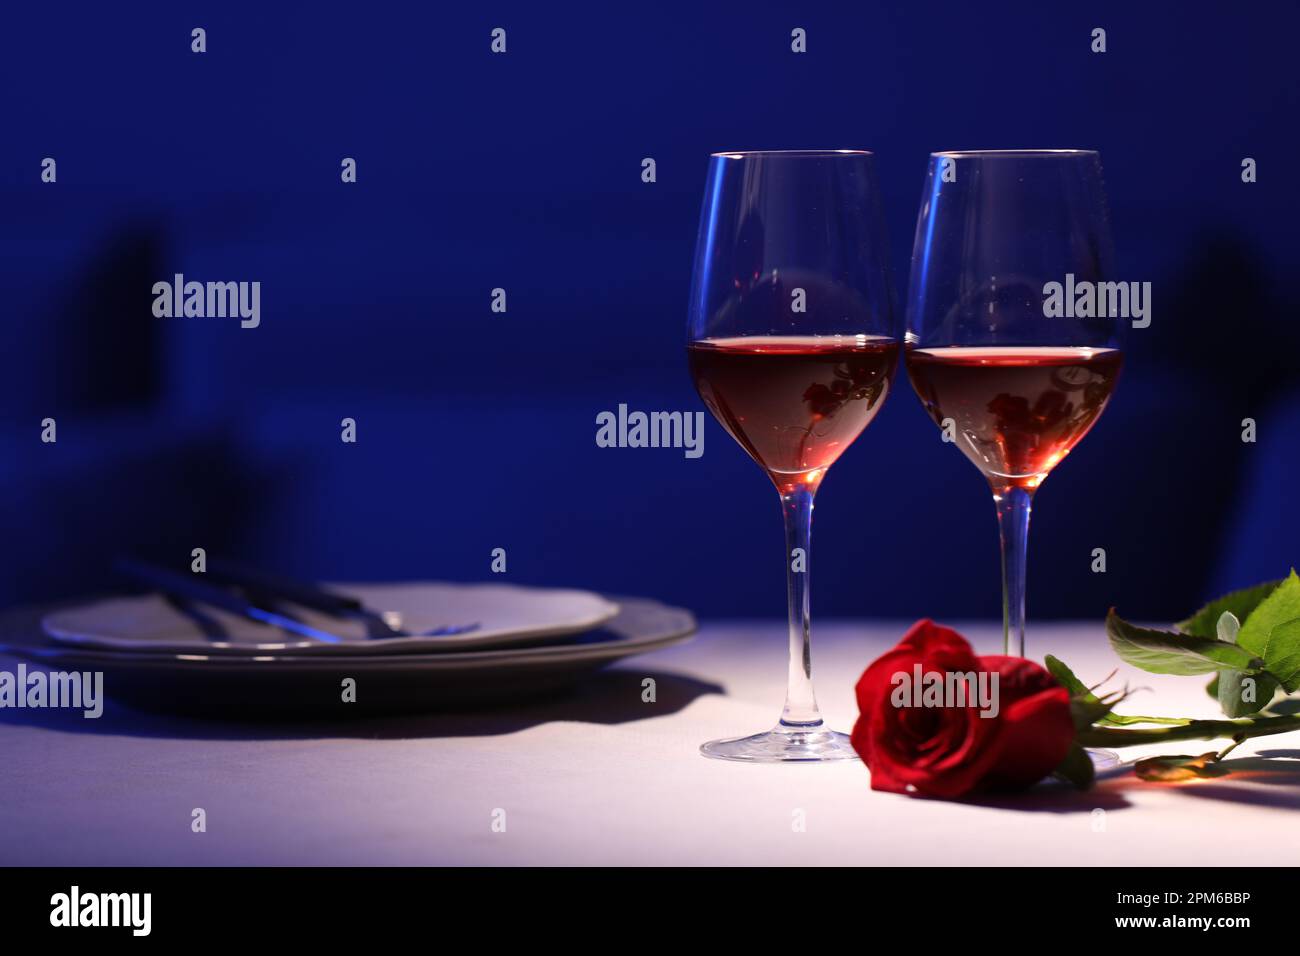 https://c8.alamy.com/comp/2PM6BBP/beautiful-table-setting-with-glasses-of-wine-and-rose-in-dark-room-romantic-dinner-for-valentines-day-2PM6BBP.jpg